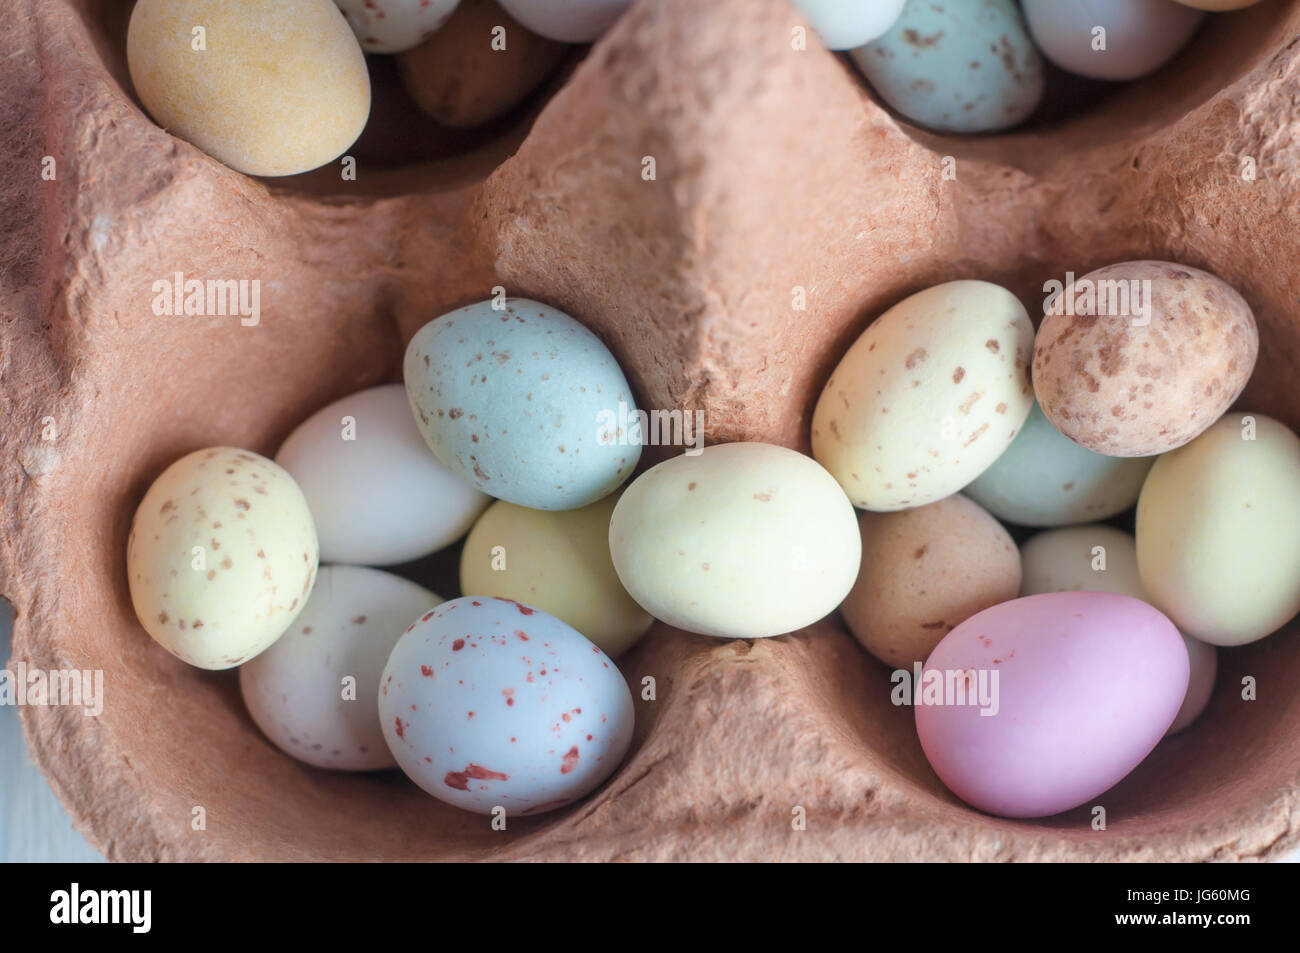 Overhead close-up view of egg shaped sweets (candies) piled into the compartments of an egg carton. Stock Photo